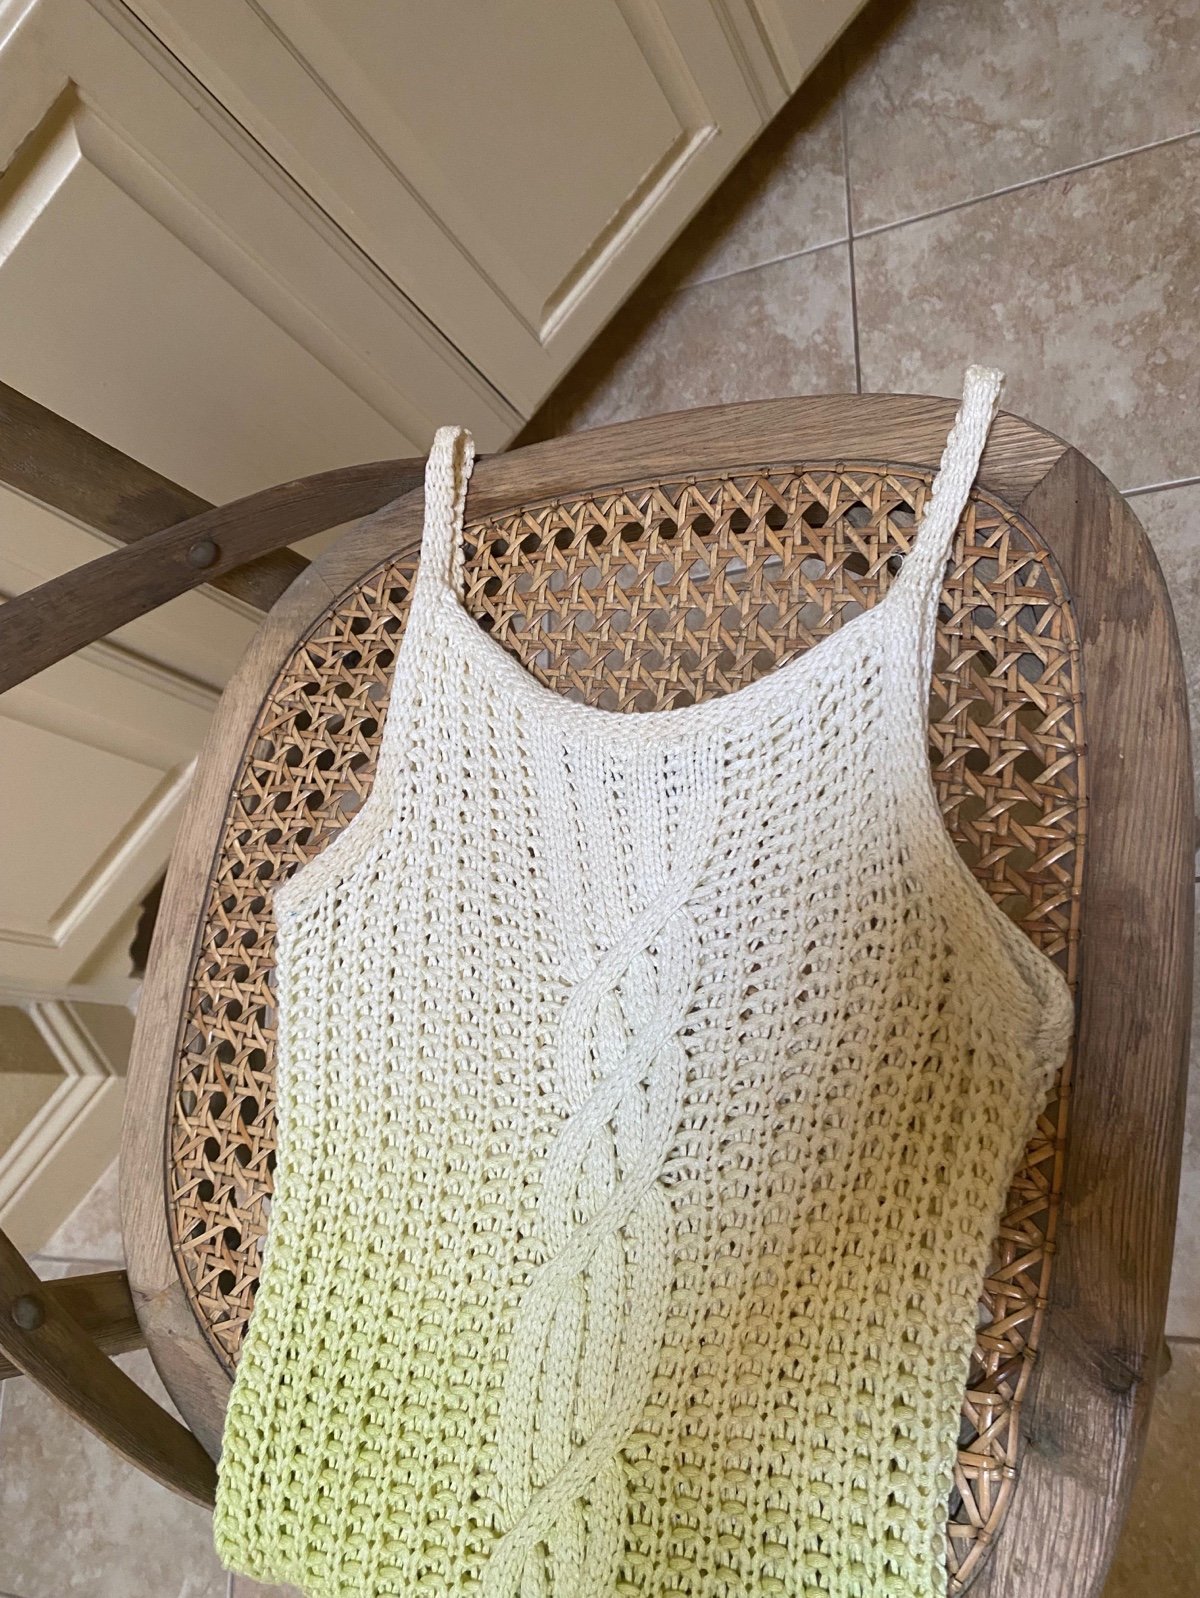 The Best Seller Jane & John knit ribbed sweater tank strap top xs oEgpqv2zP just for you